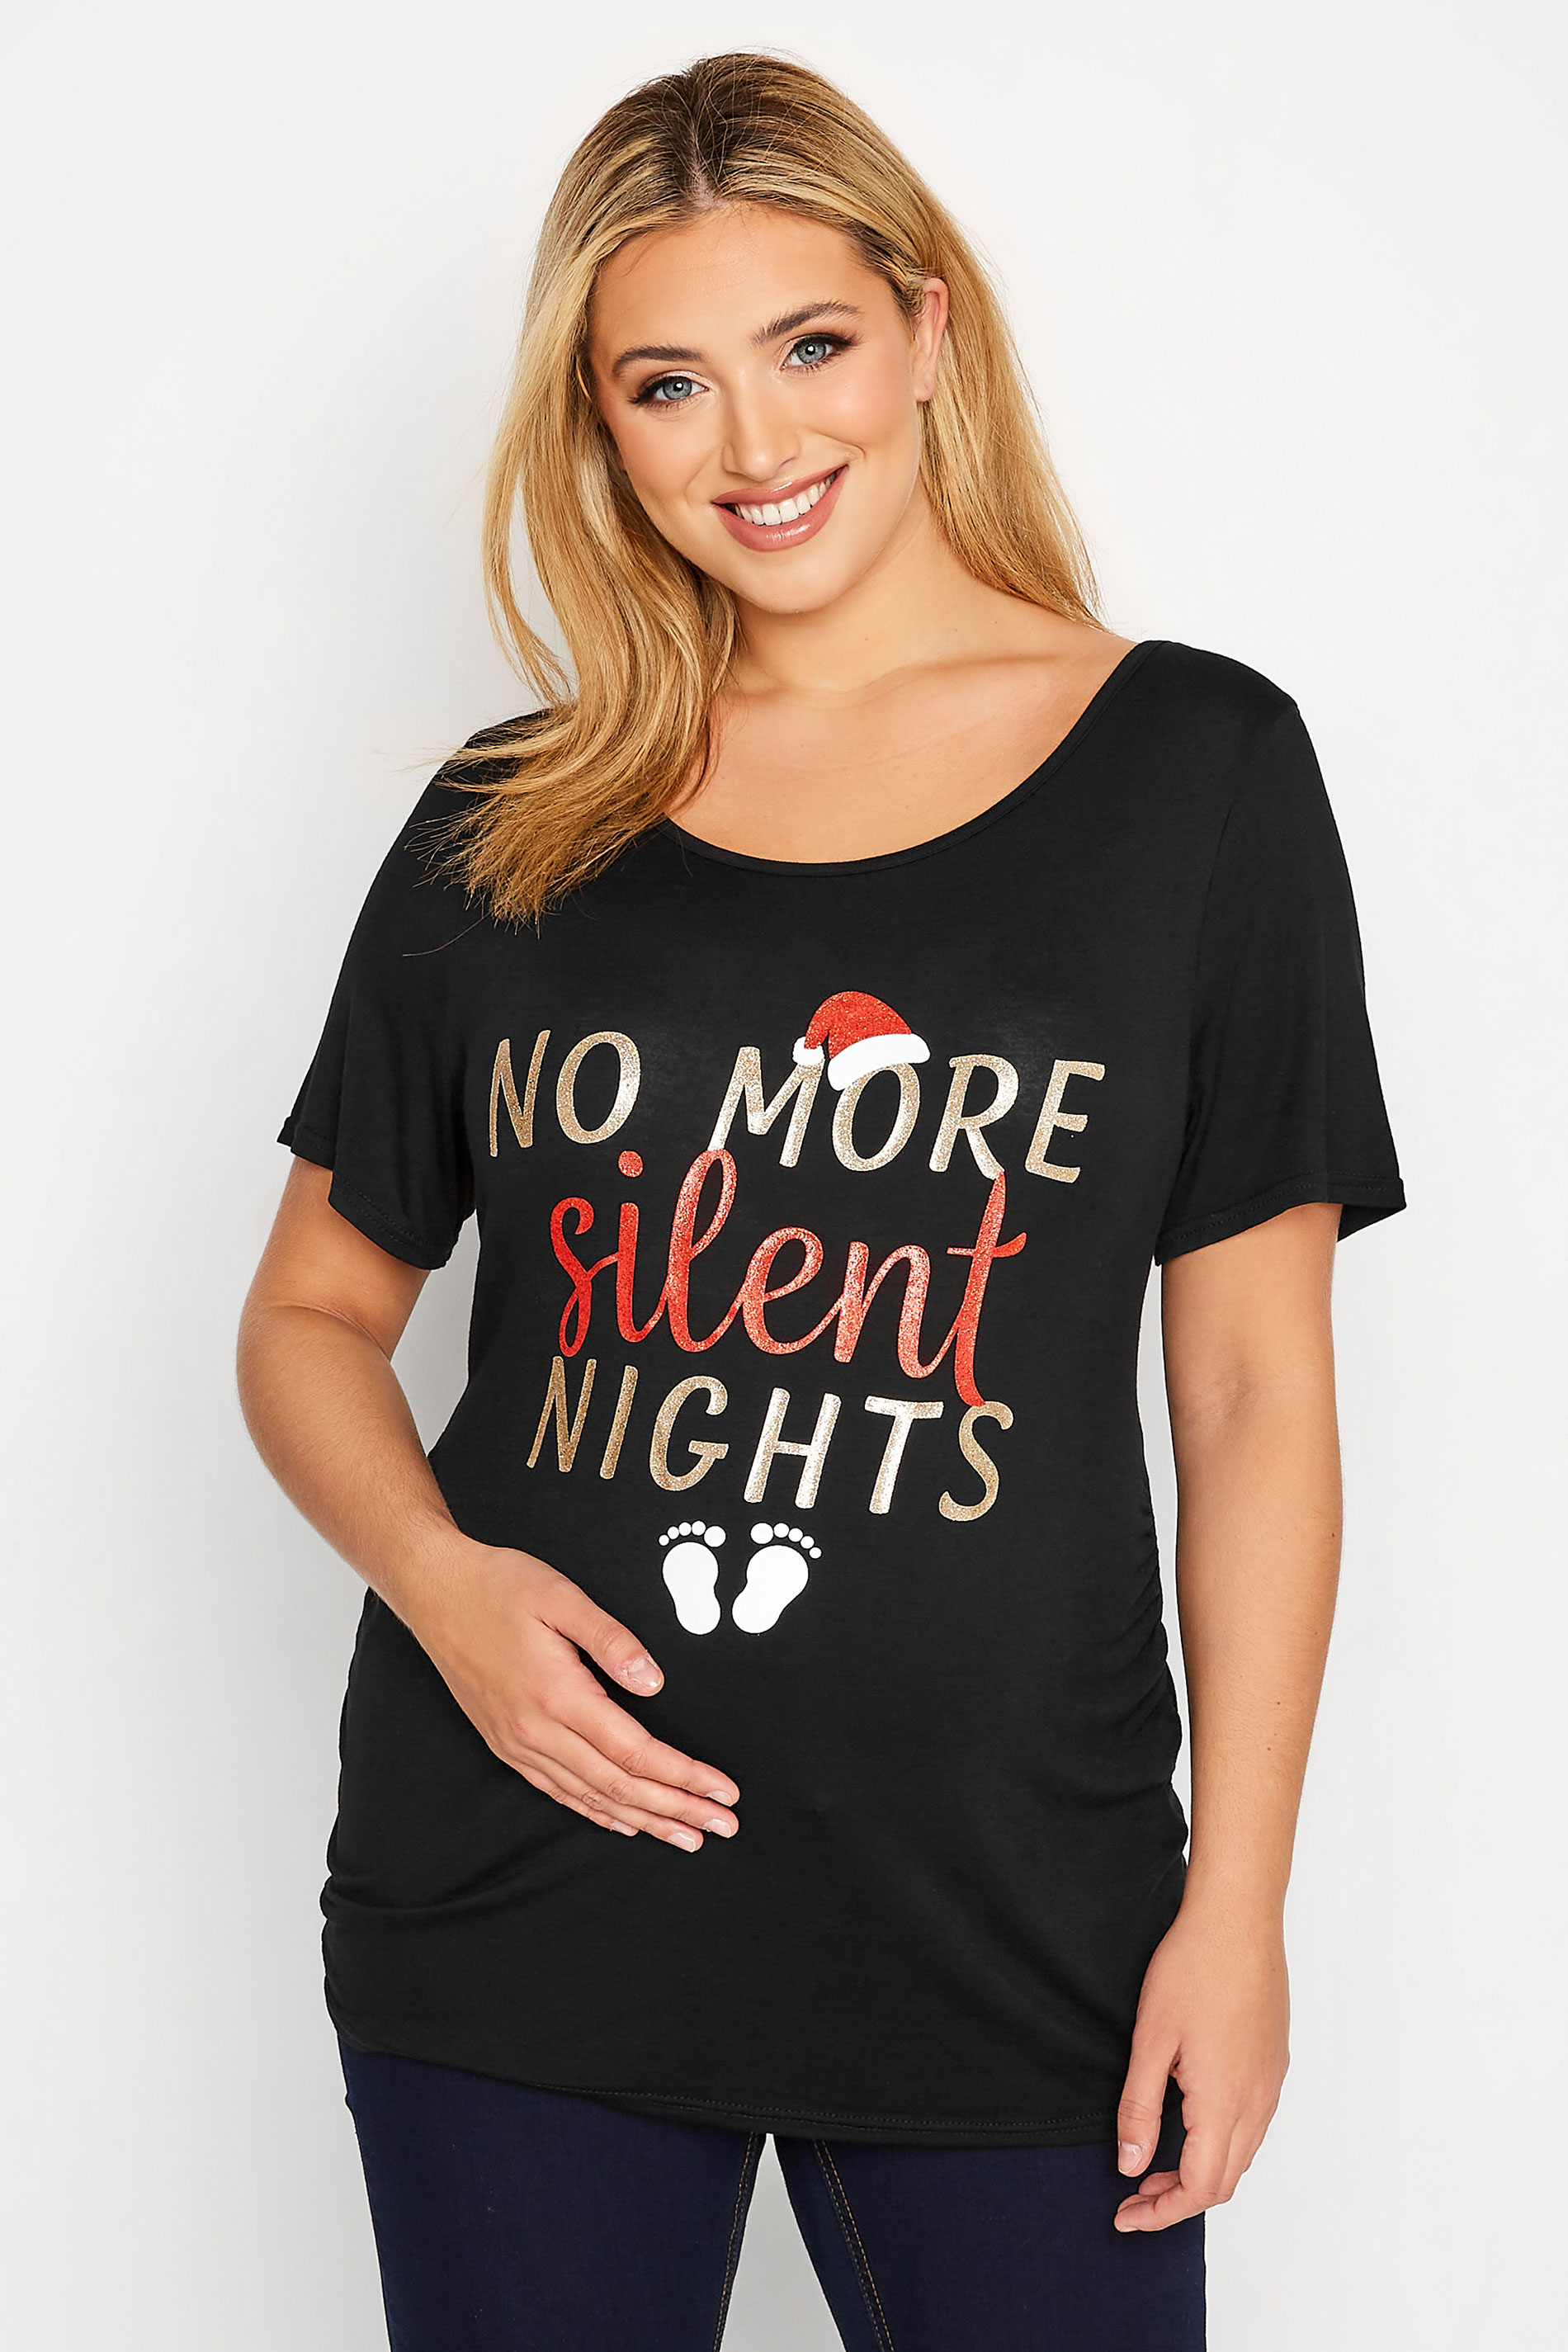 BUMP IT UP MATERNITY Curve Black 'No More Silent Nights' Christmas Top 1